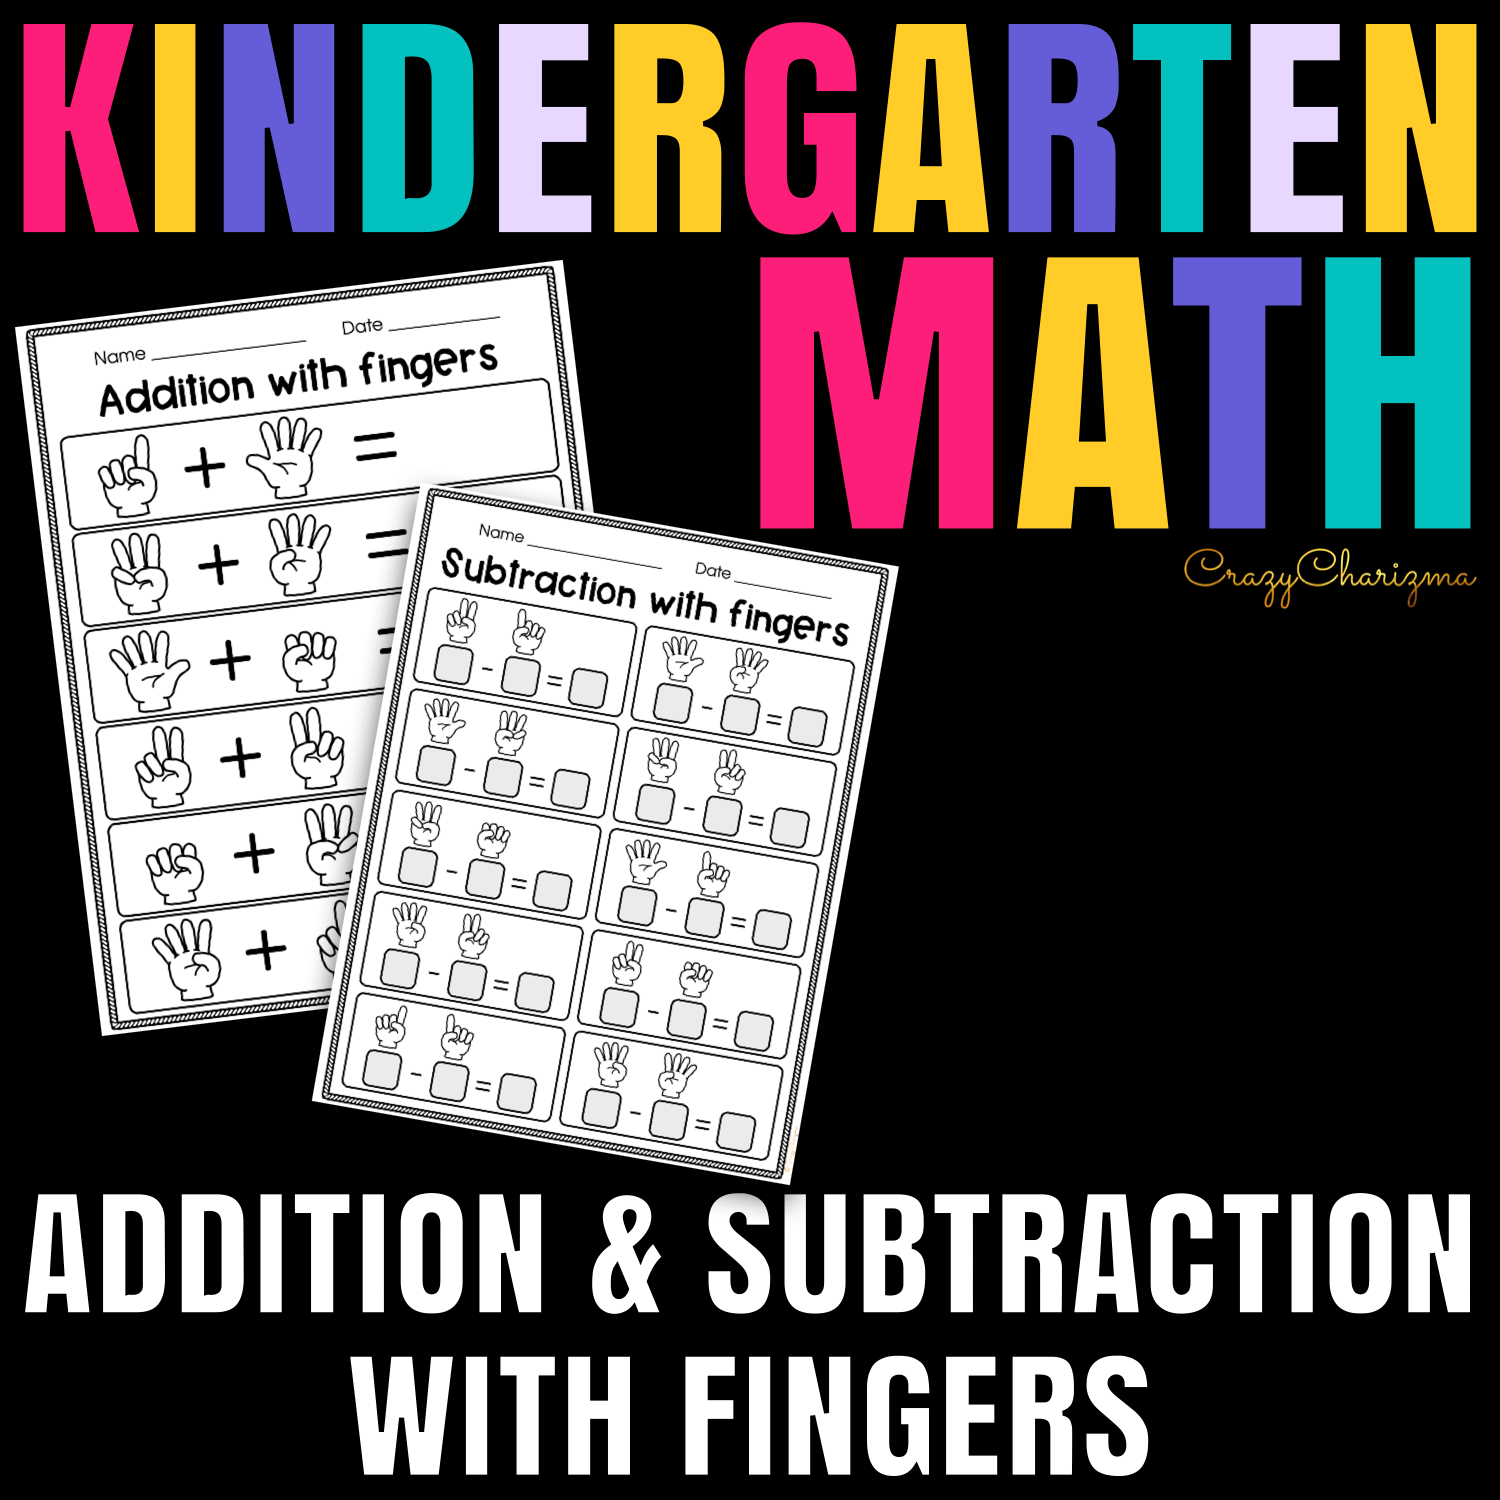 Addition and Subtraction to 10 with Fingers